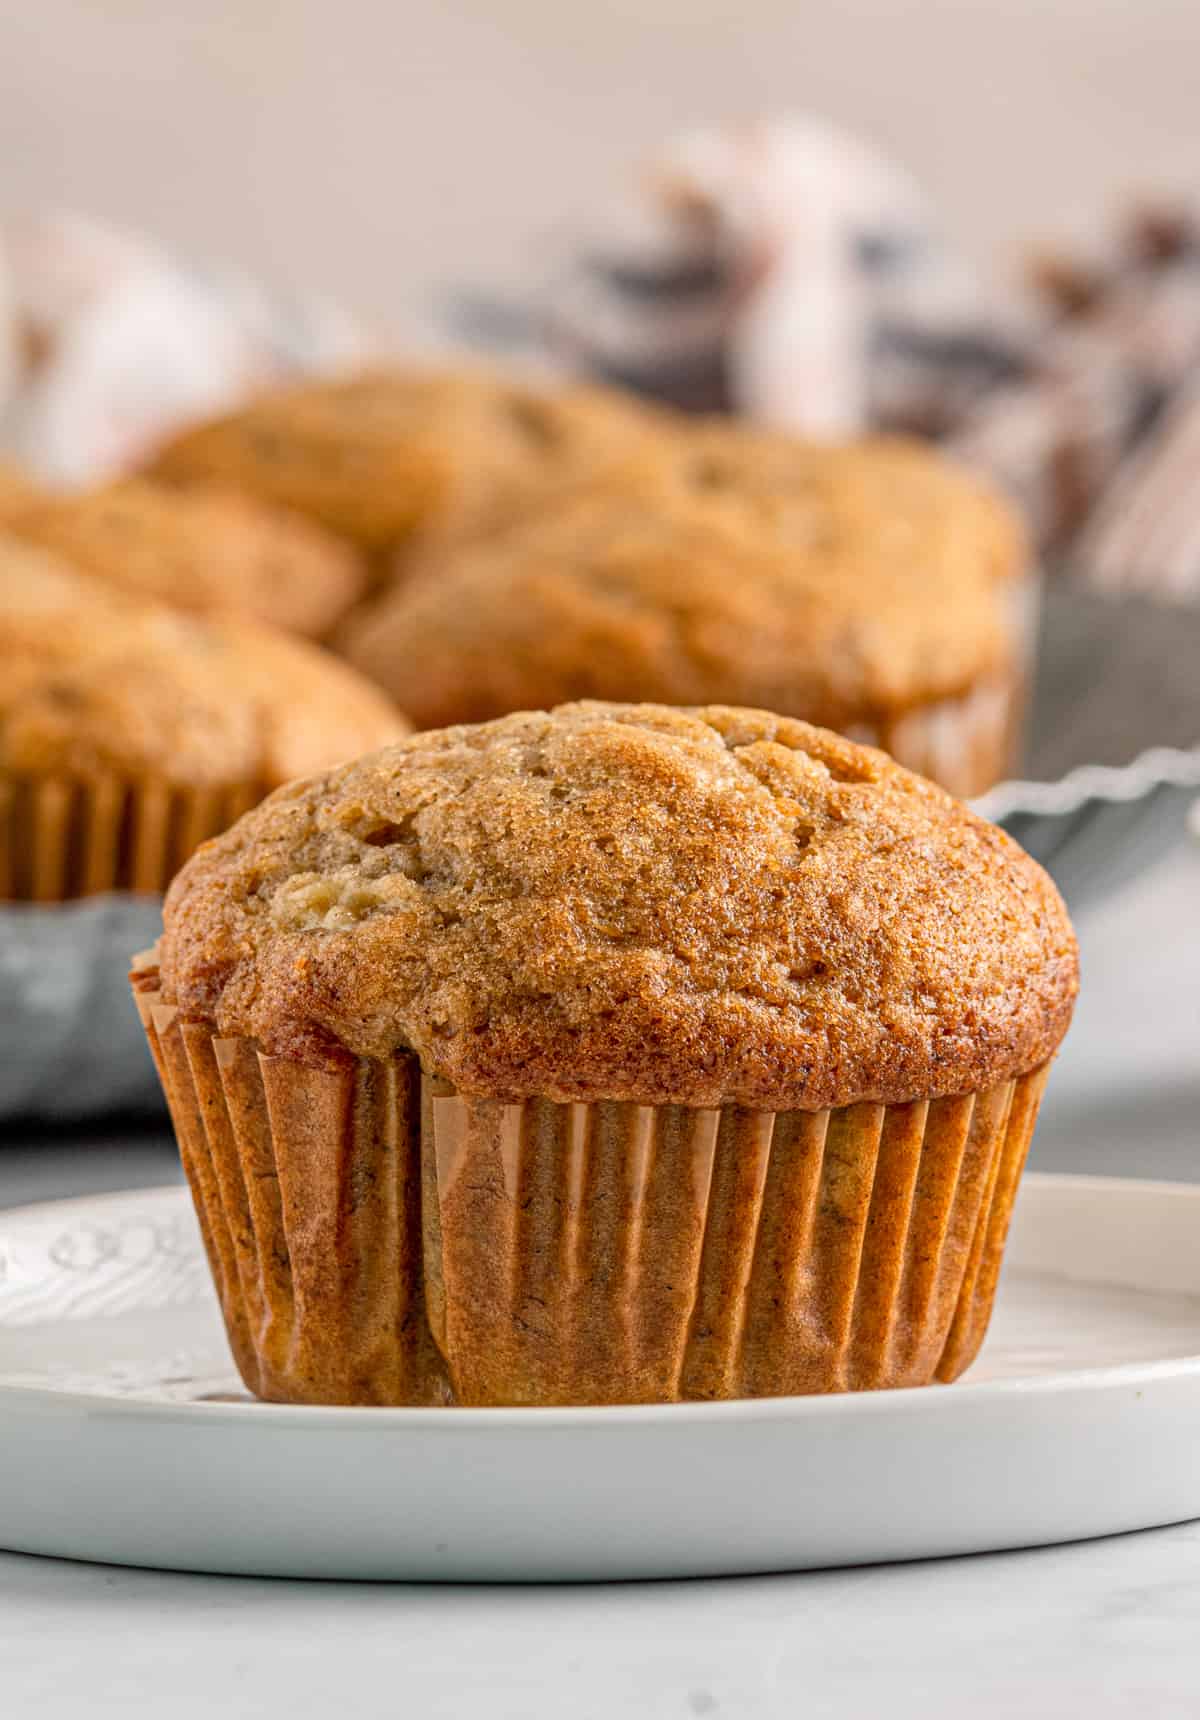 One of the Easy Banana Muffins on white plate with more muffins in background.